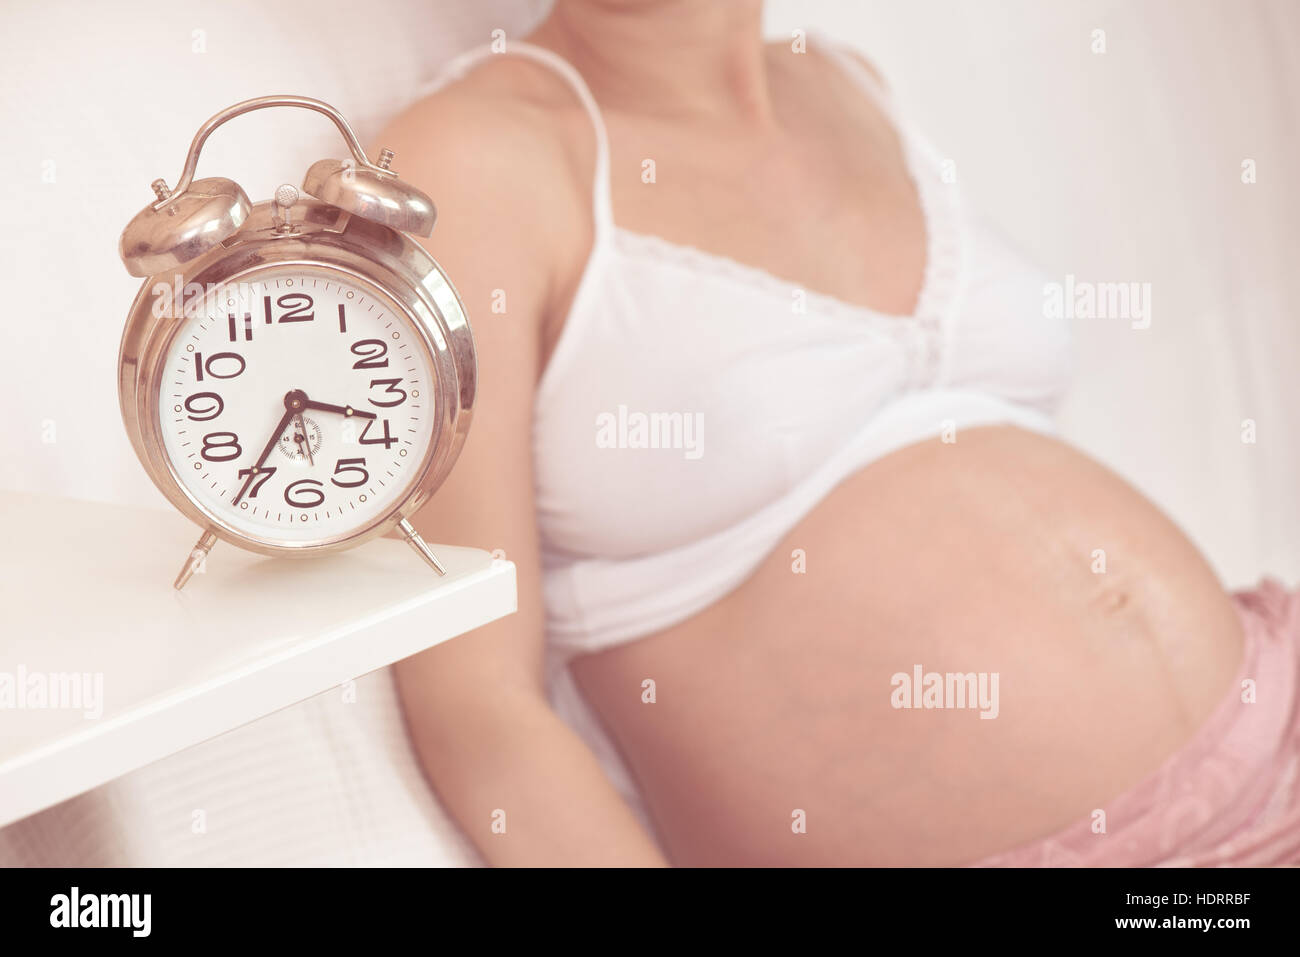 Pregnant woman with clock Stock Photo